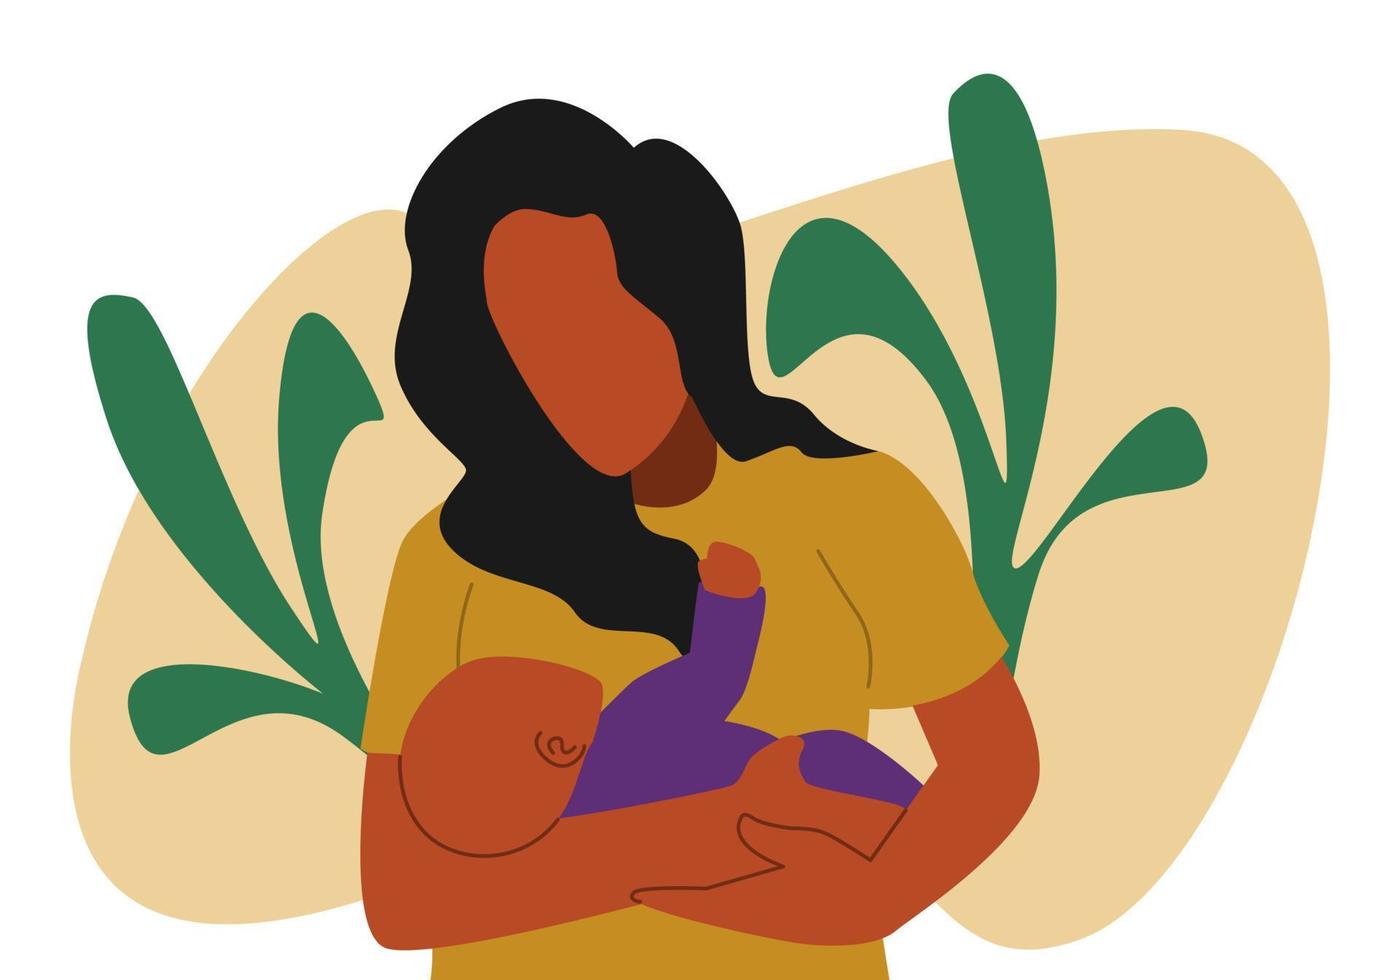 african american mother takes care of her baby. parents holding baby. wavy curly hair woman. concept of family, children, raising. vector flat style illustration.